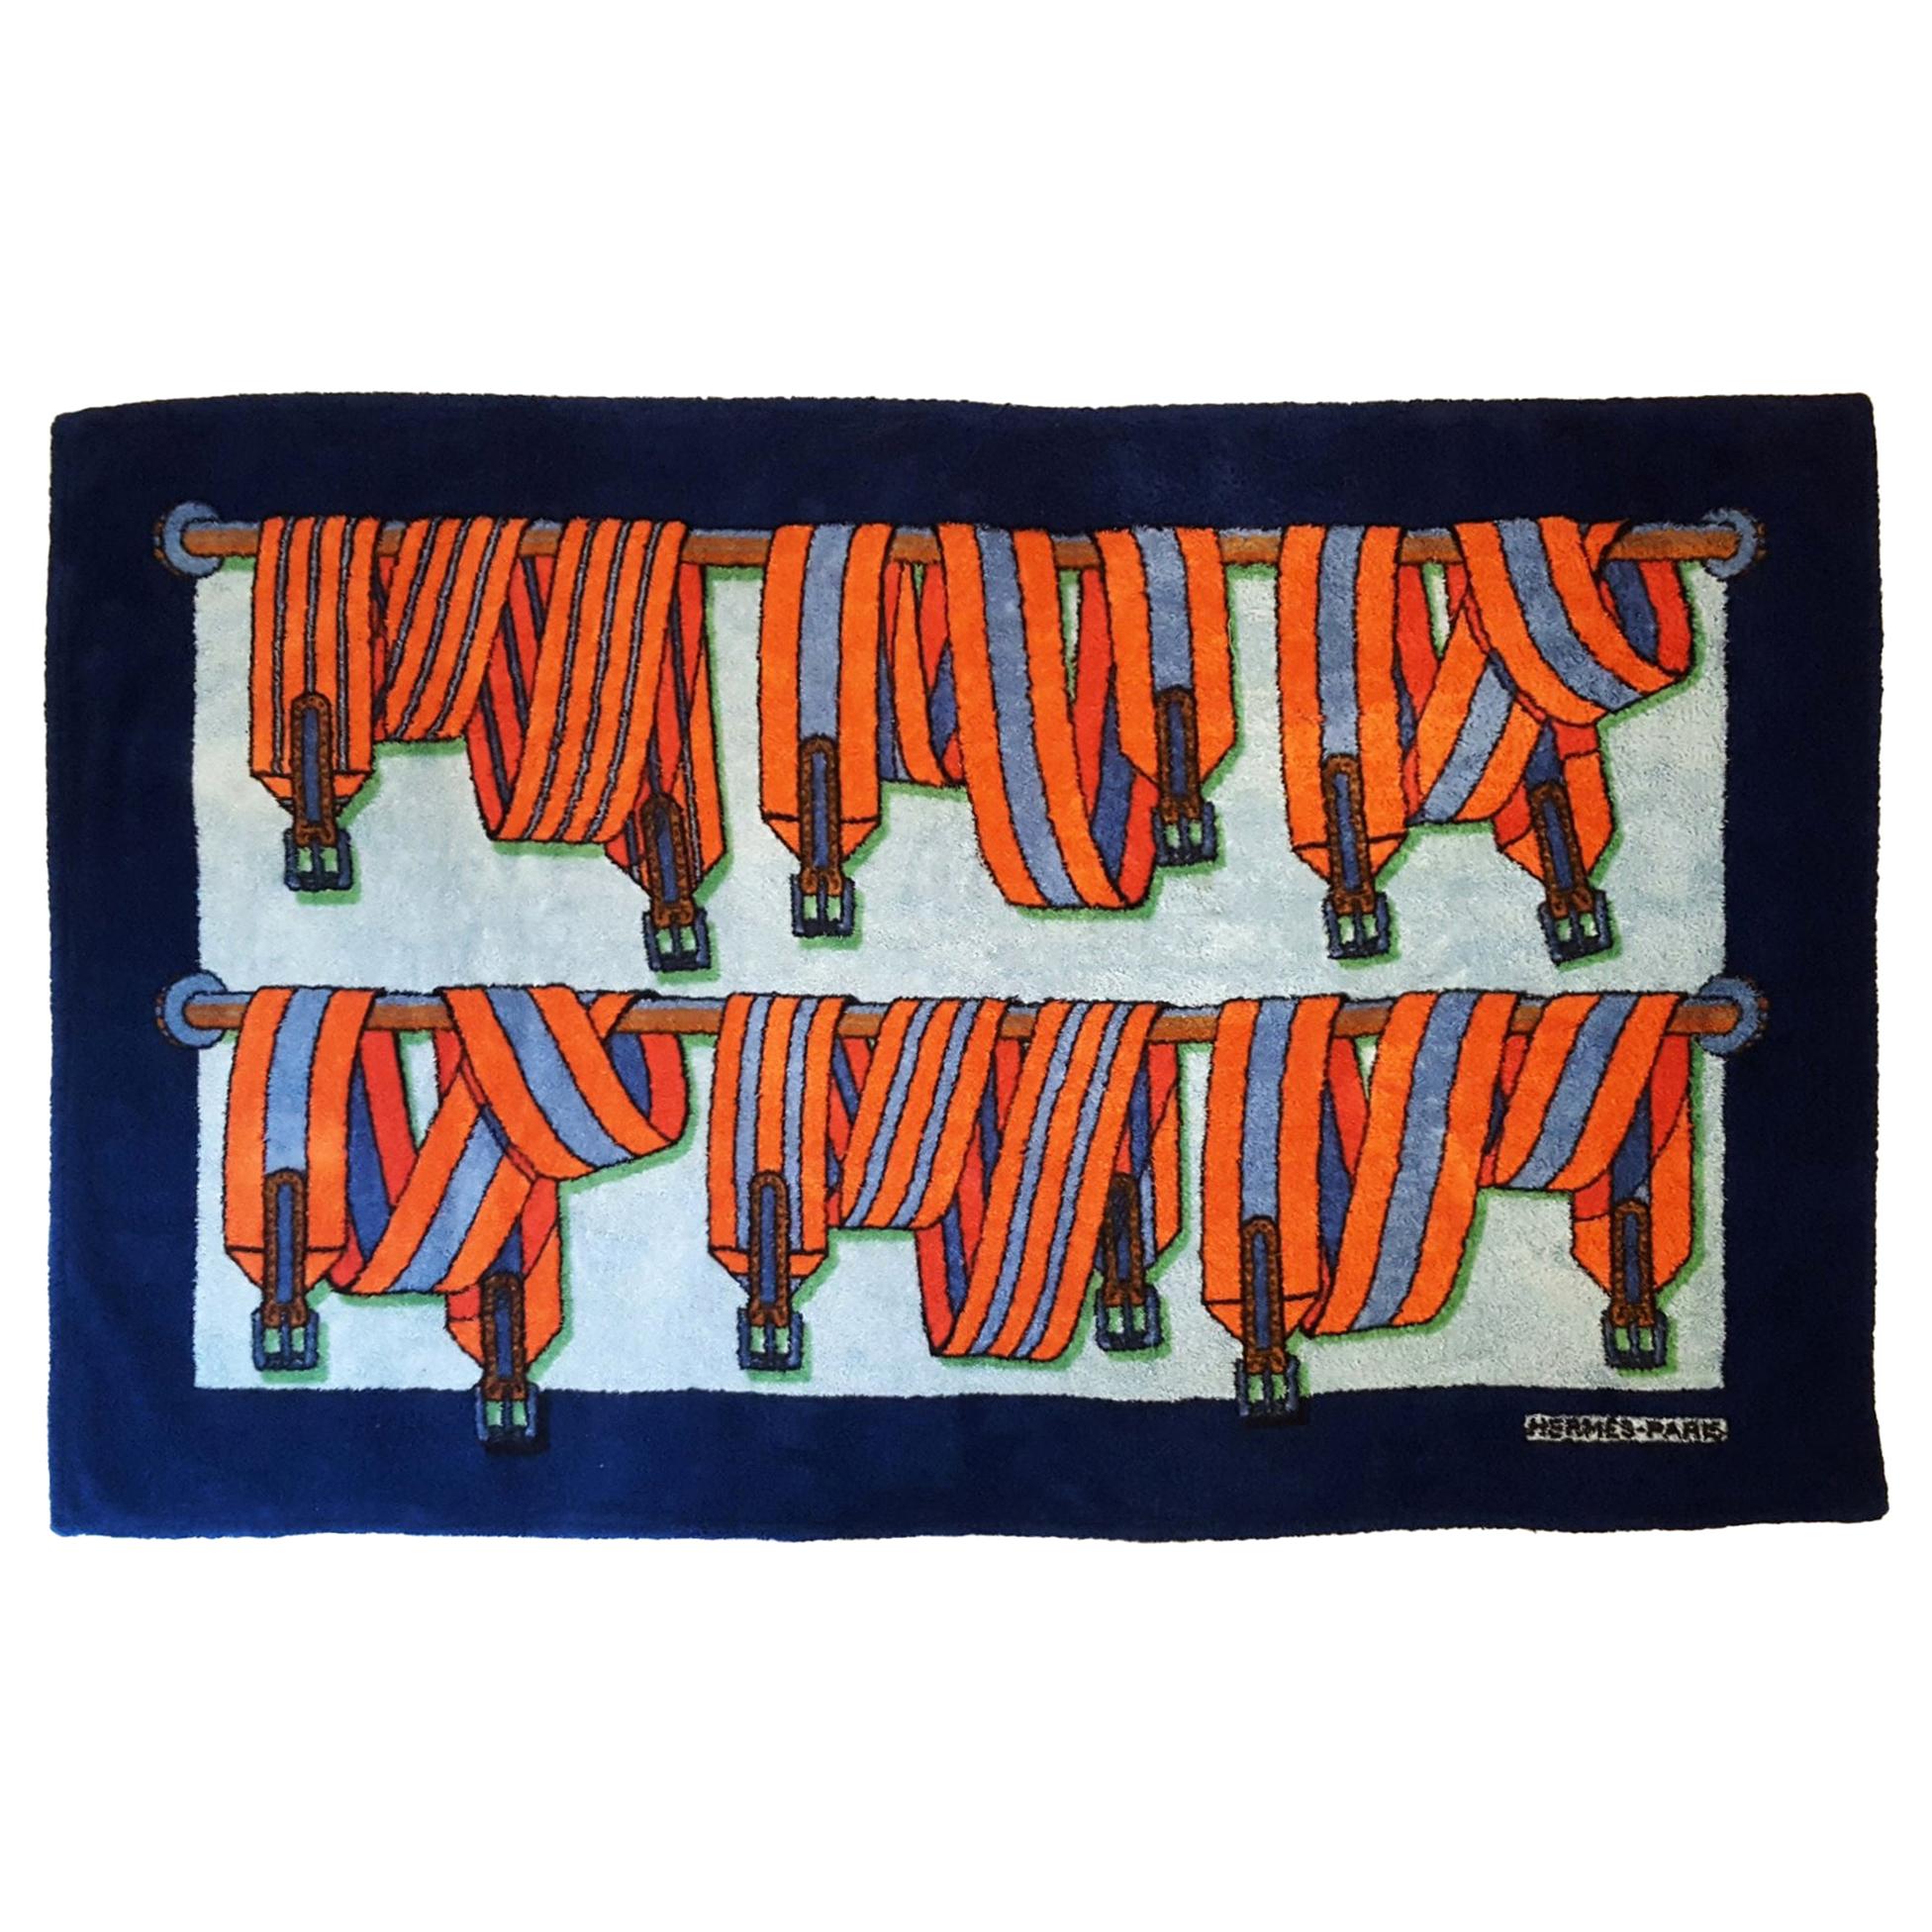 Hermes Rare Suspenders Beach Towel - 2 Available For Sale